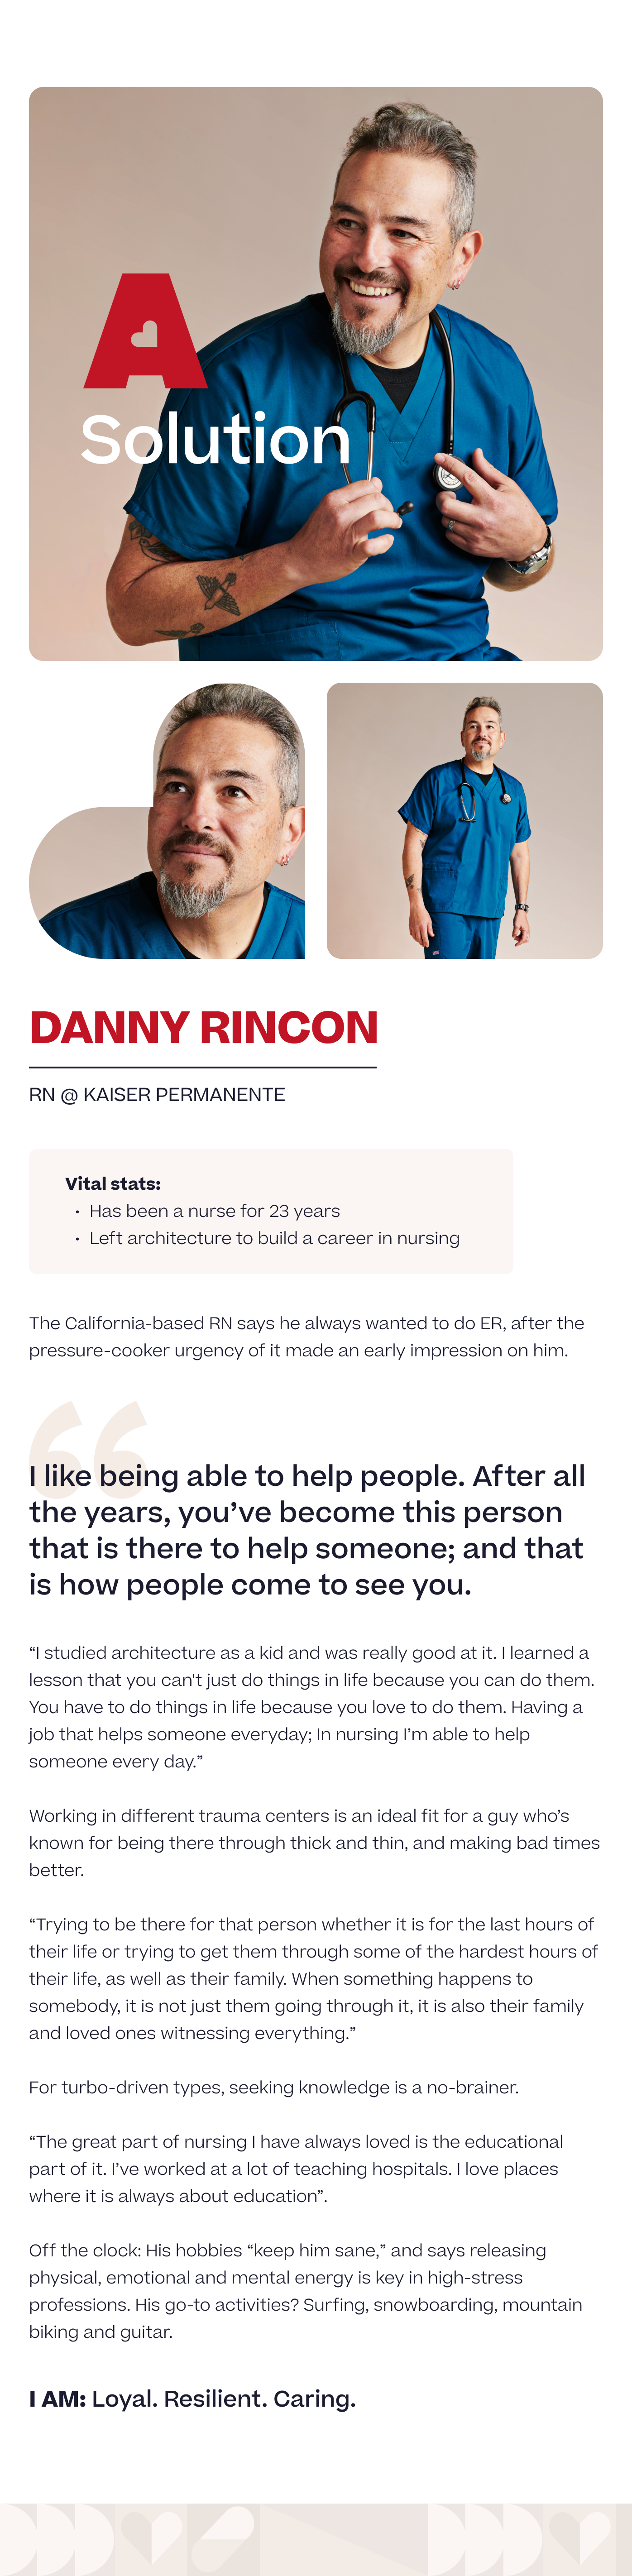 About Danny Rincon, California-based RN at Kaiser Permanente.